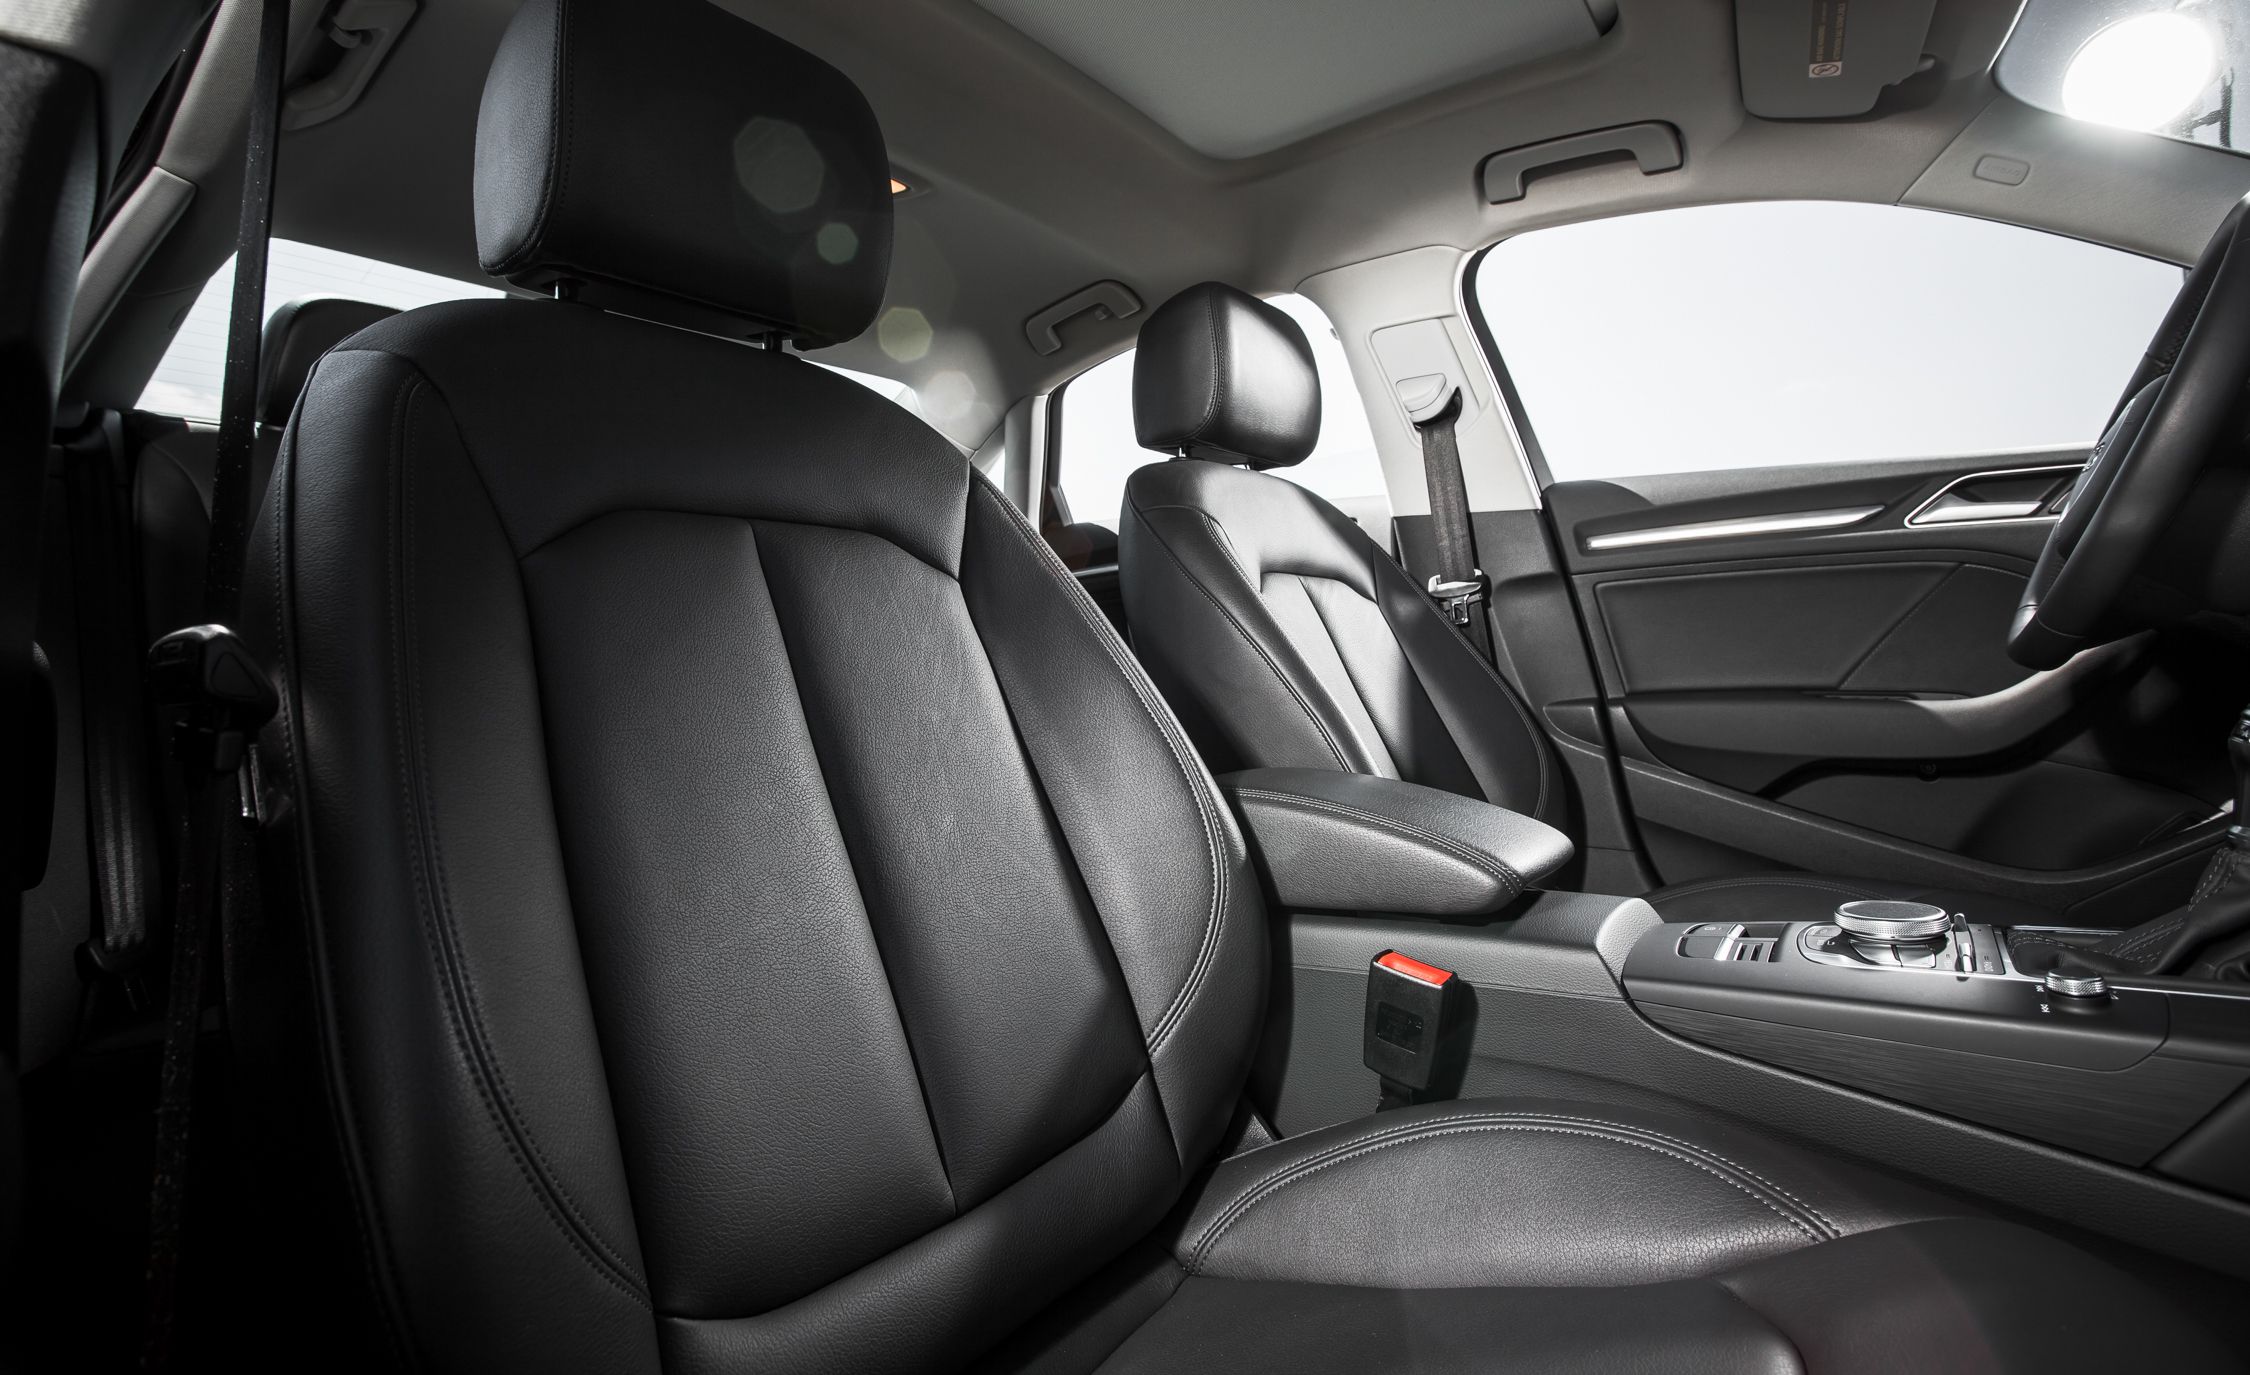 2015 Audi A3 TDI Interior Seats Front (View 15 of 50)